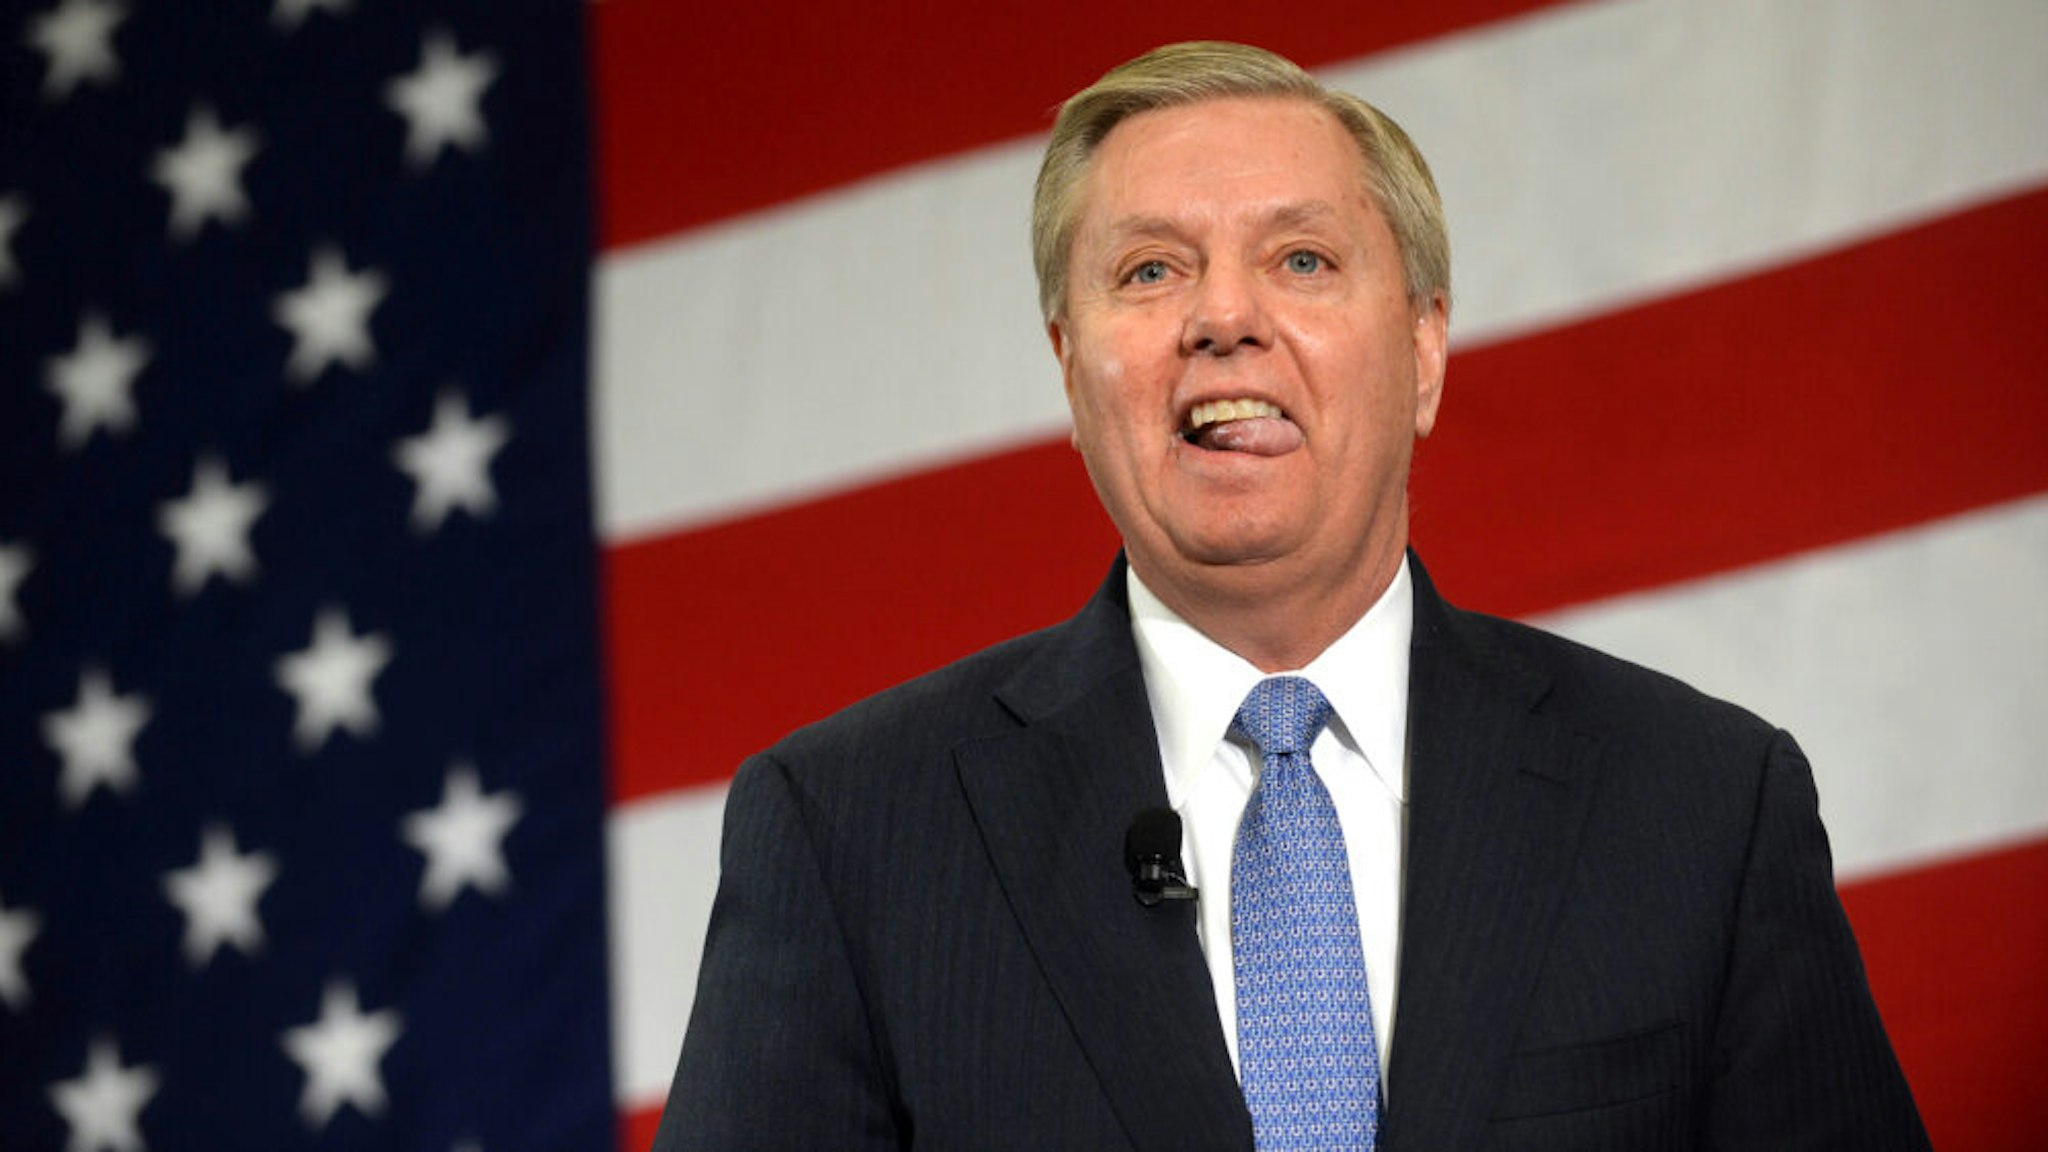 NASHUA, NH - APRIL 18: U.S. Sen. Lindsay Graham (R-SC) speaks at the First in the Nation Republican Leadership Summit April 18, 2015 in Nashua, New Hampshire. The Summit brought together local and national Republicans and was attended by all the Republicans candidates as well as those eyeing a run for the nomination.